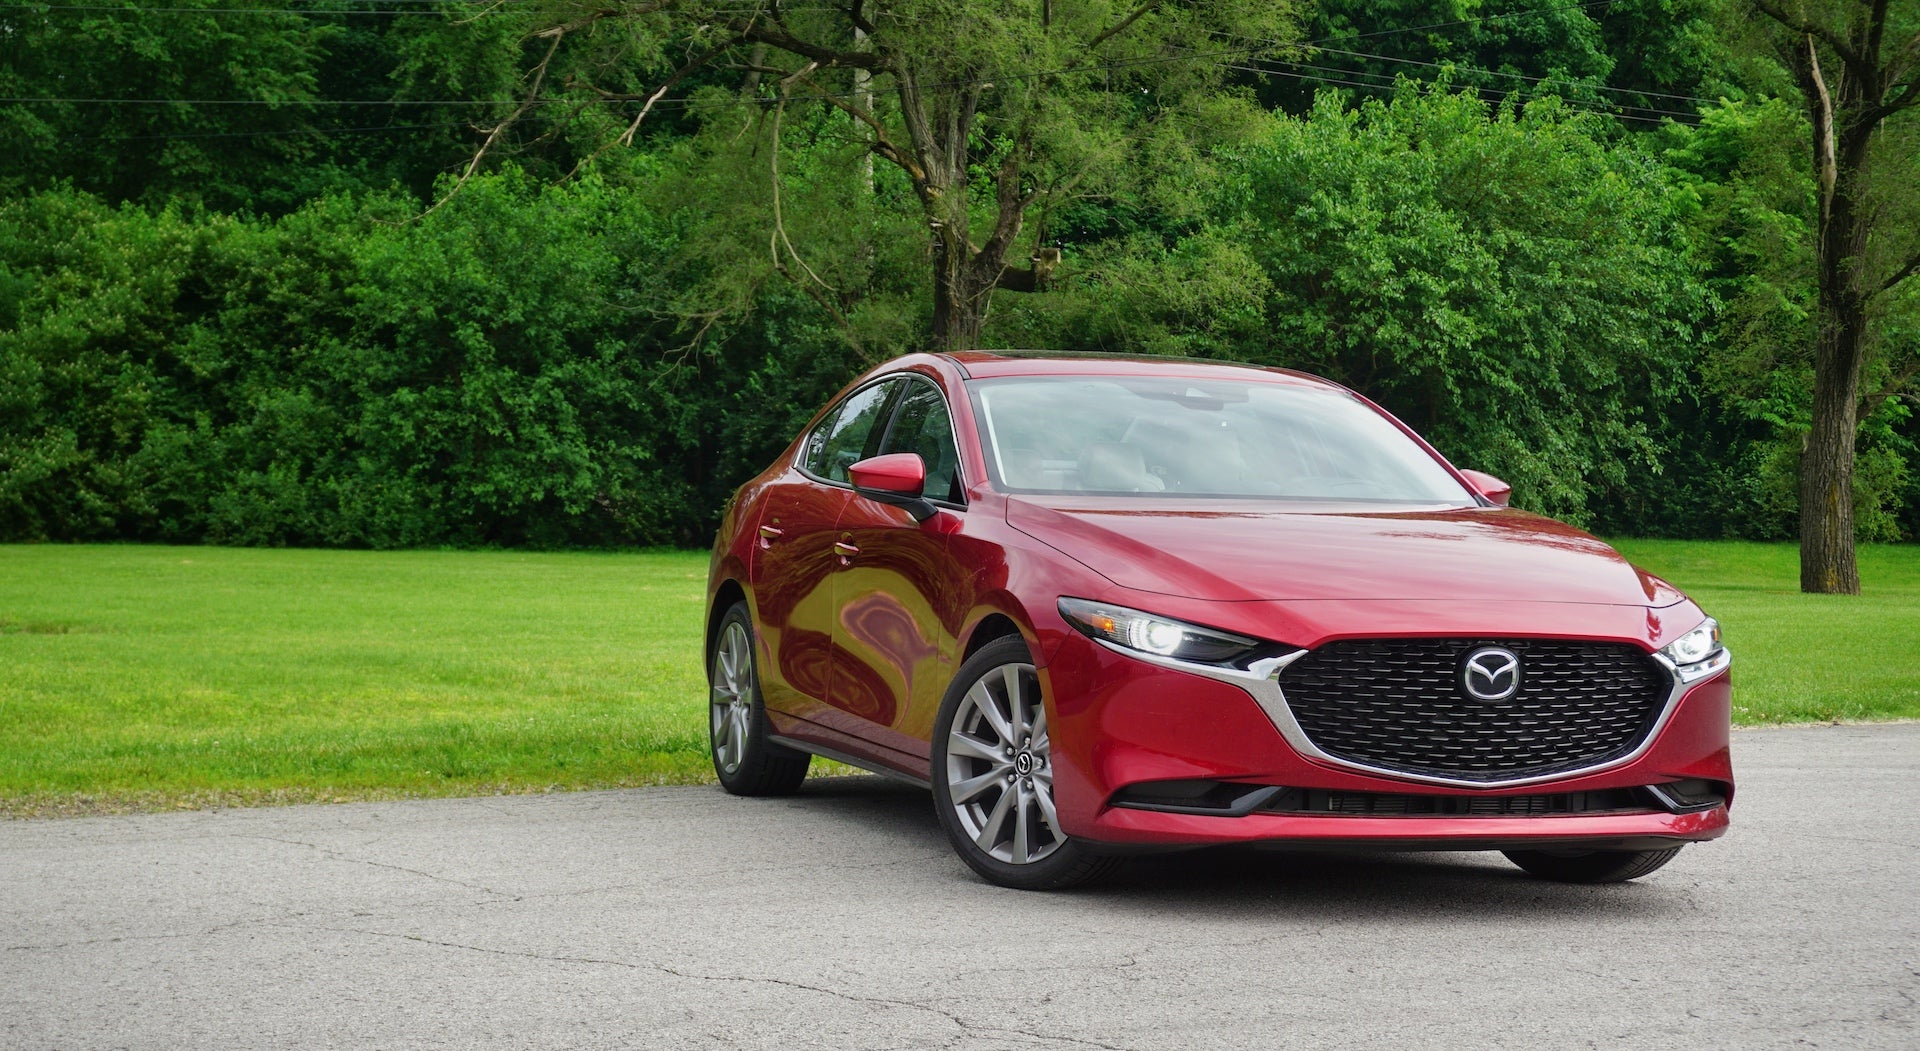 2019 Mazda3 Sedan Review: Stealing BMW’s Lunch in a $30,000 Compact Car